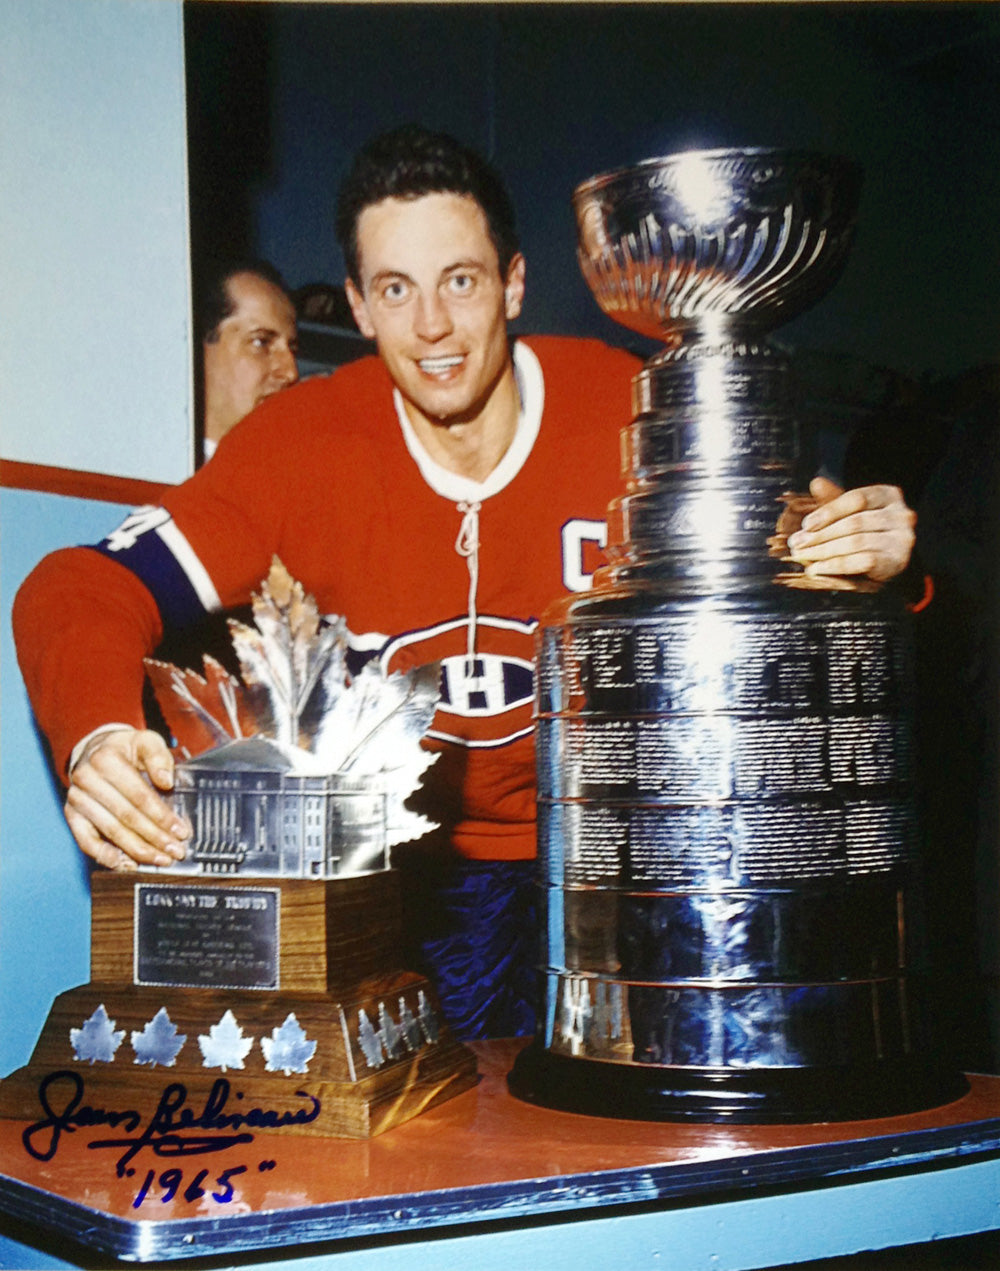 Jean Beliveau Signed 8X10 Photo (Stanley Cup) Montreal Canadiens, Montreal Canadiens, NHL, Hockey, Autographed, Signed, AAHPH30295